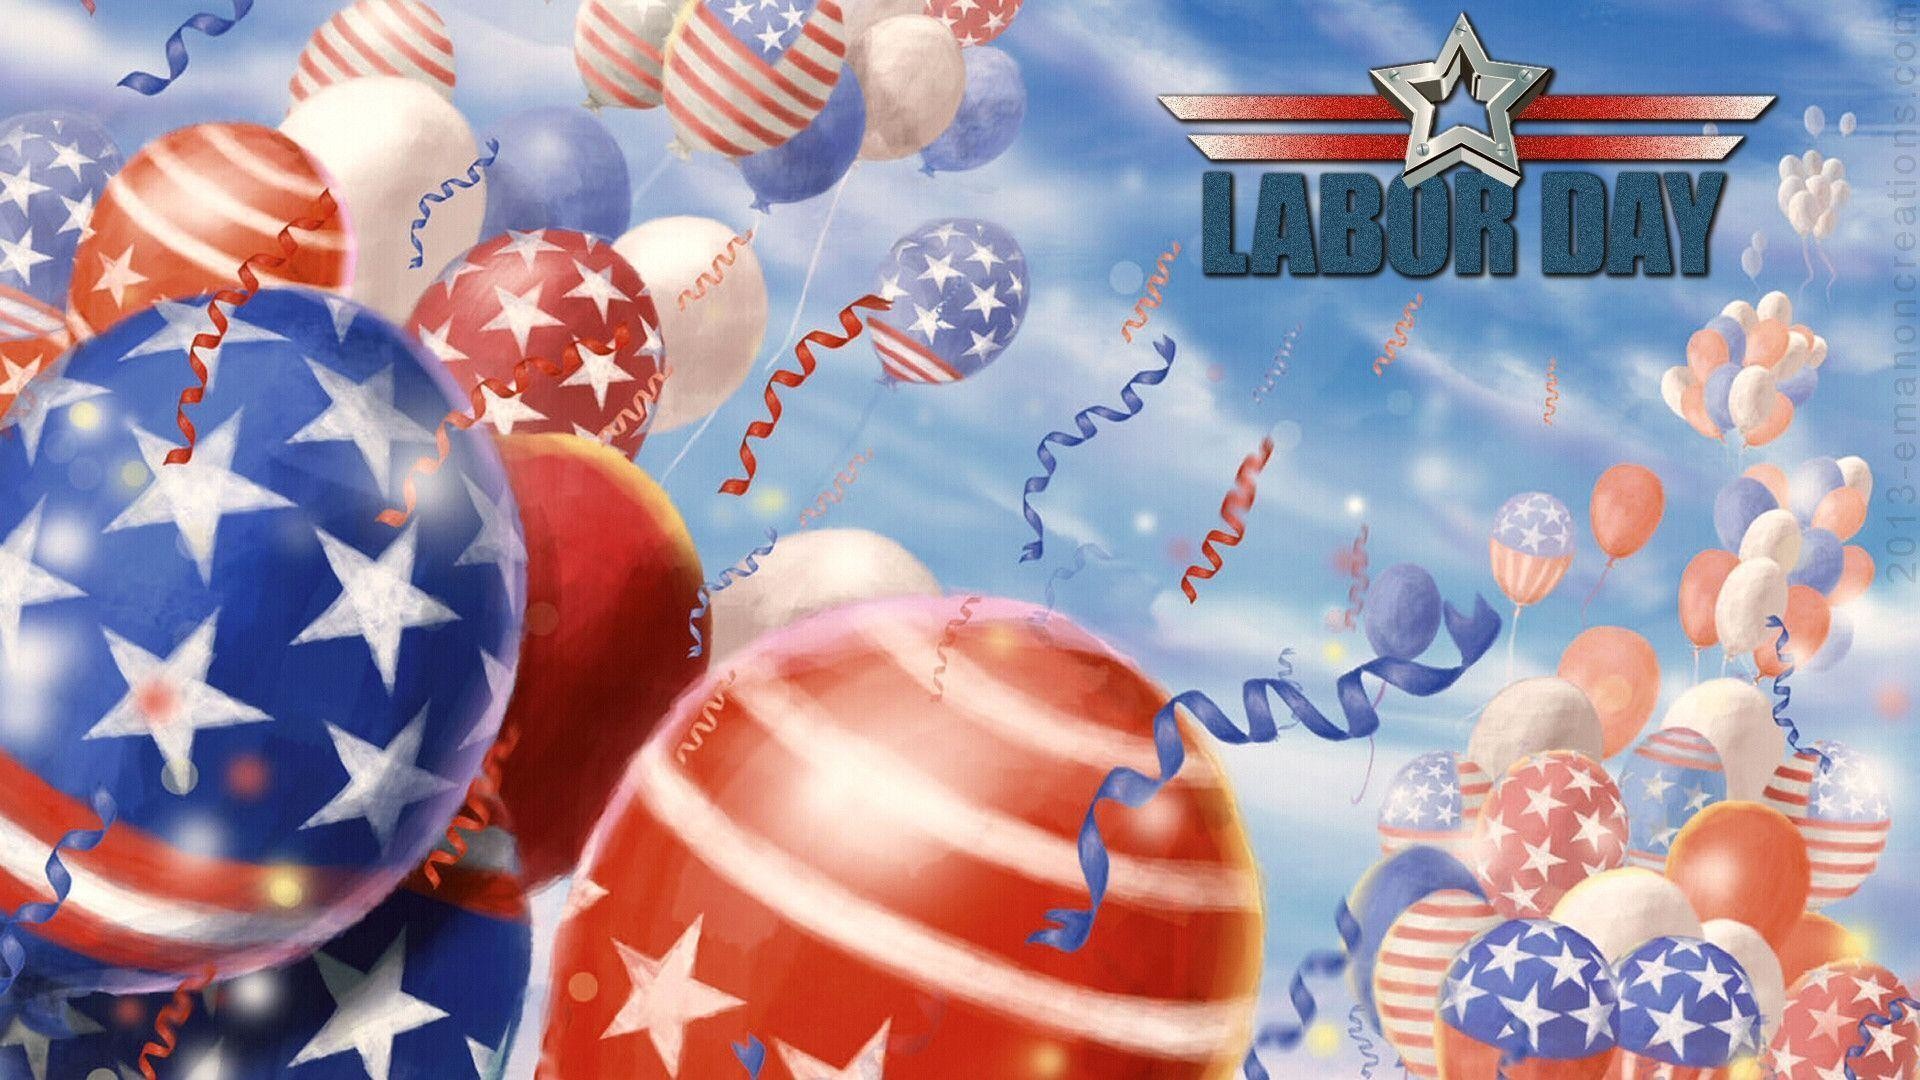 1920x1080 Labor Day wallpapers in hd - HD Wallpaper